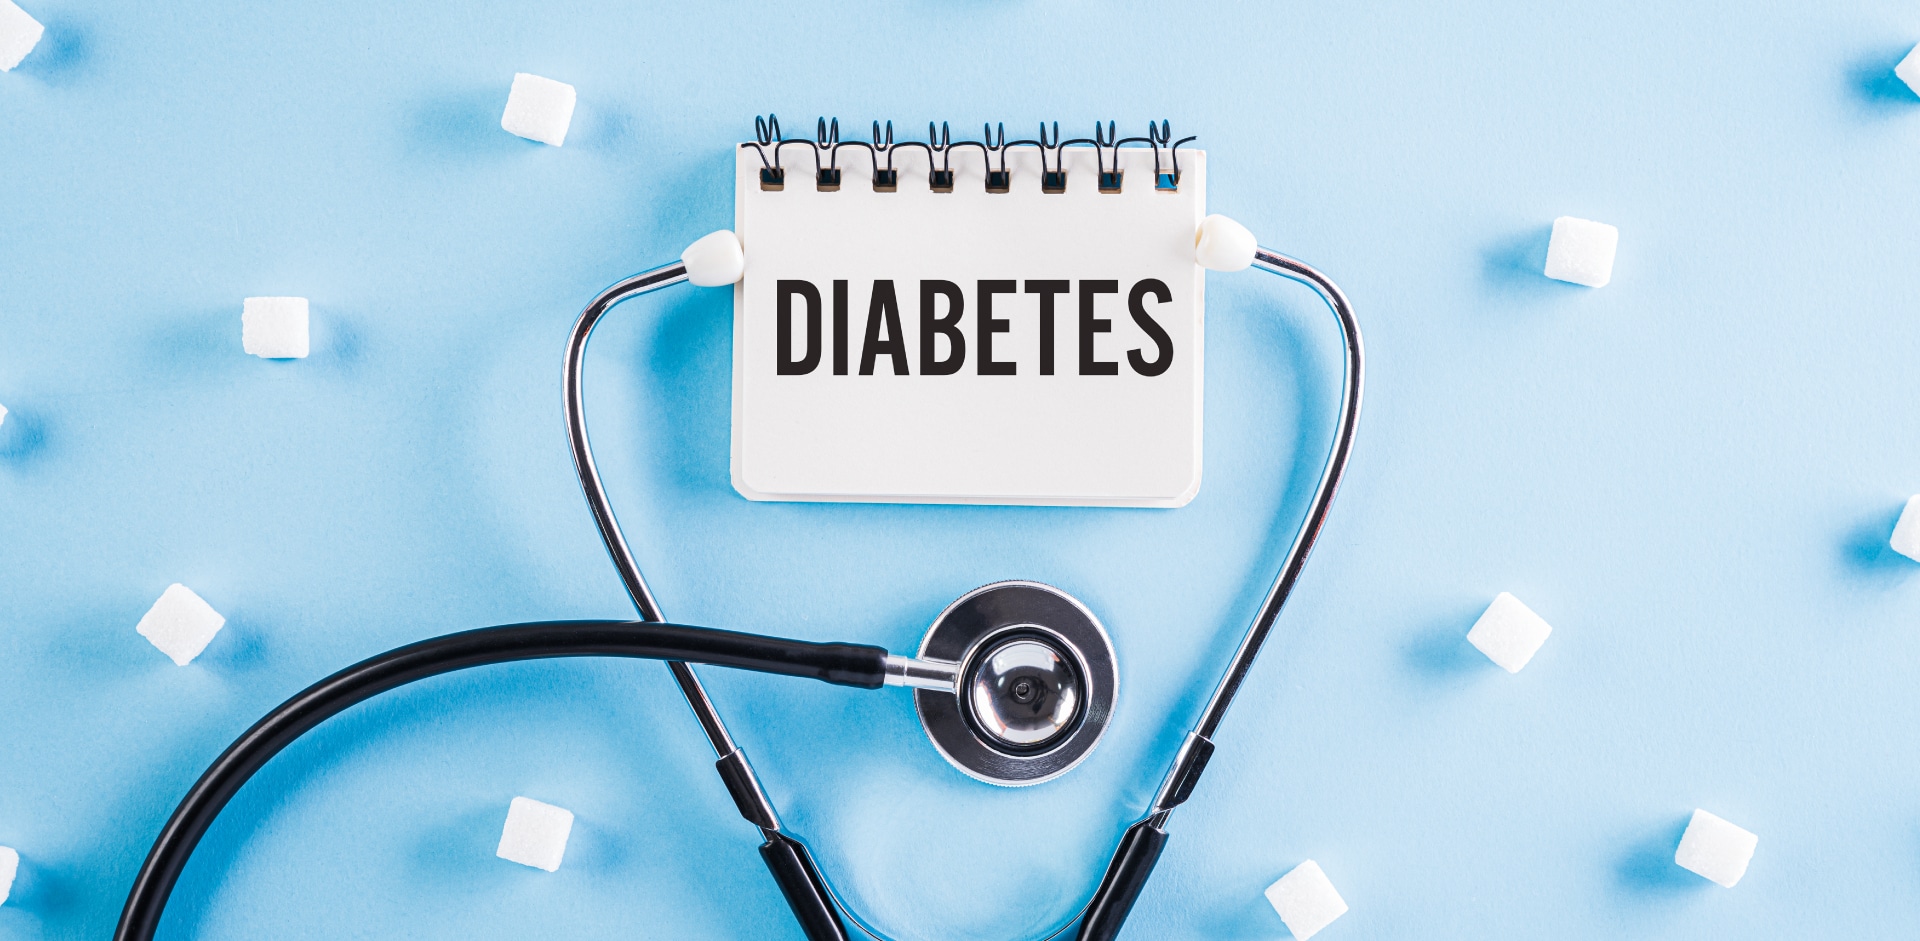 Top Reasons For Diabetics To Consider Taking Health Insurance